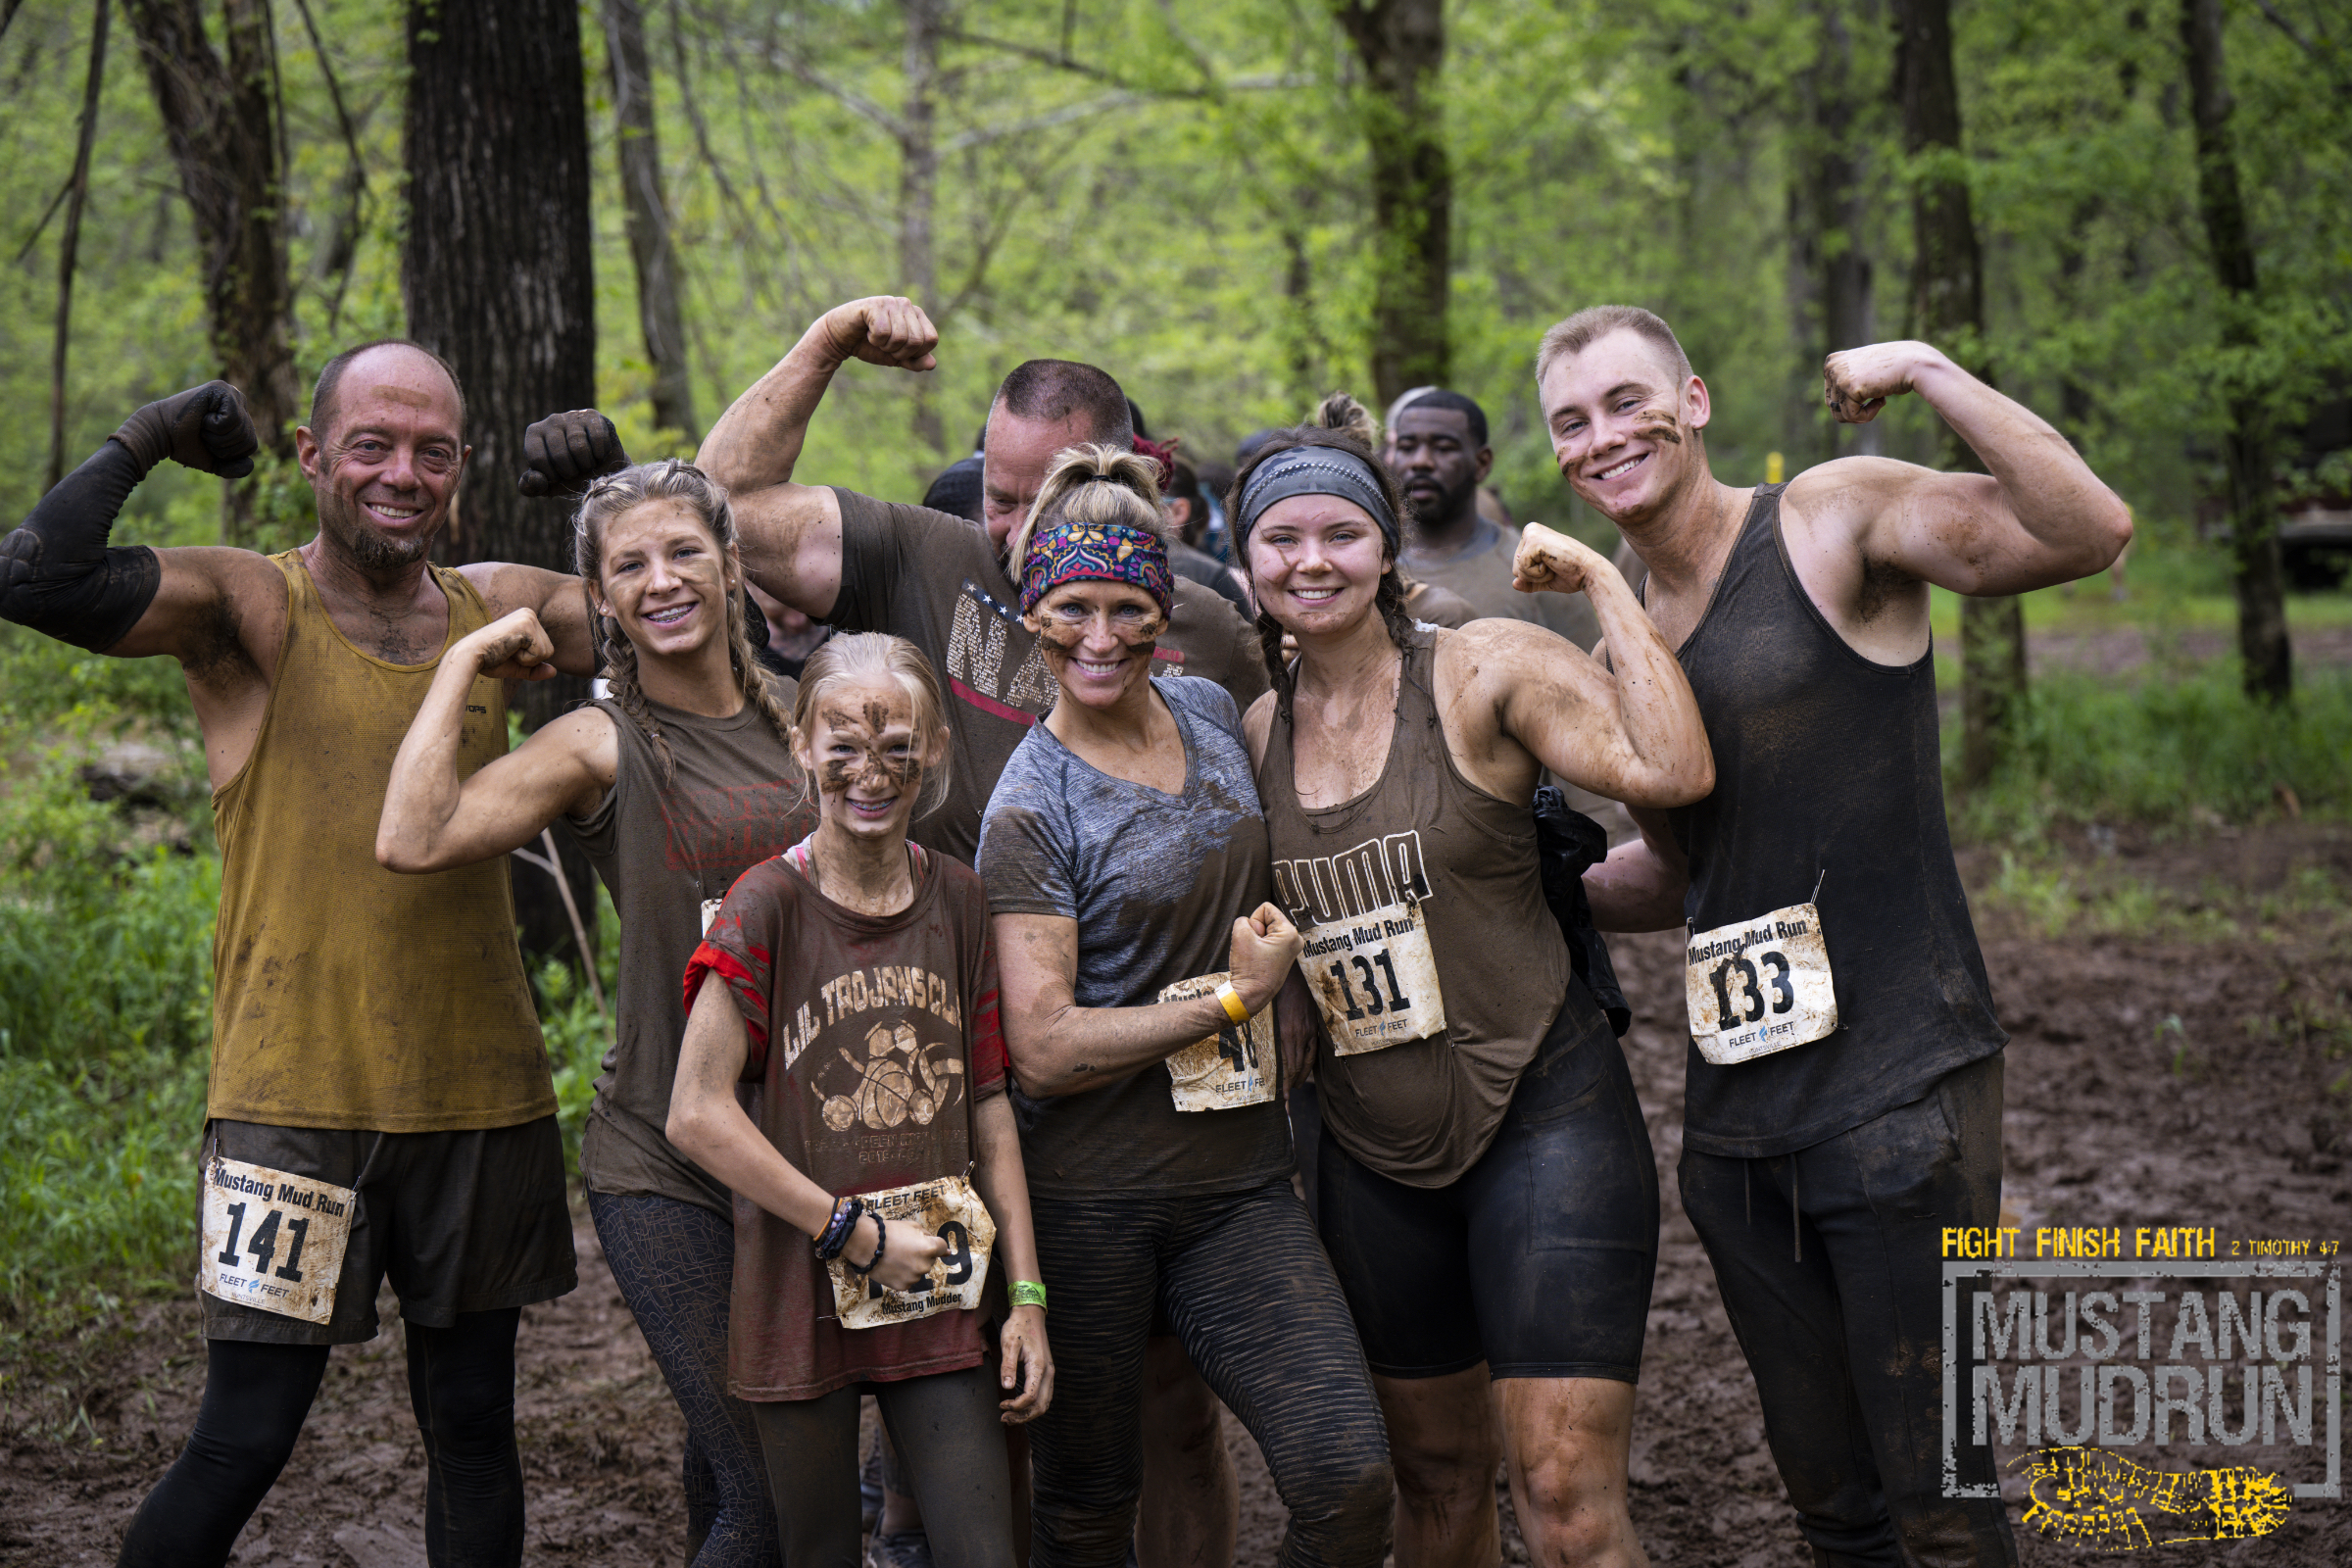 Mustang Mud Run Is For Everyone- Scheduled For April 15 - The Madison  Record